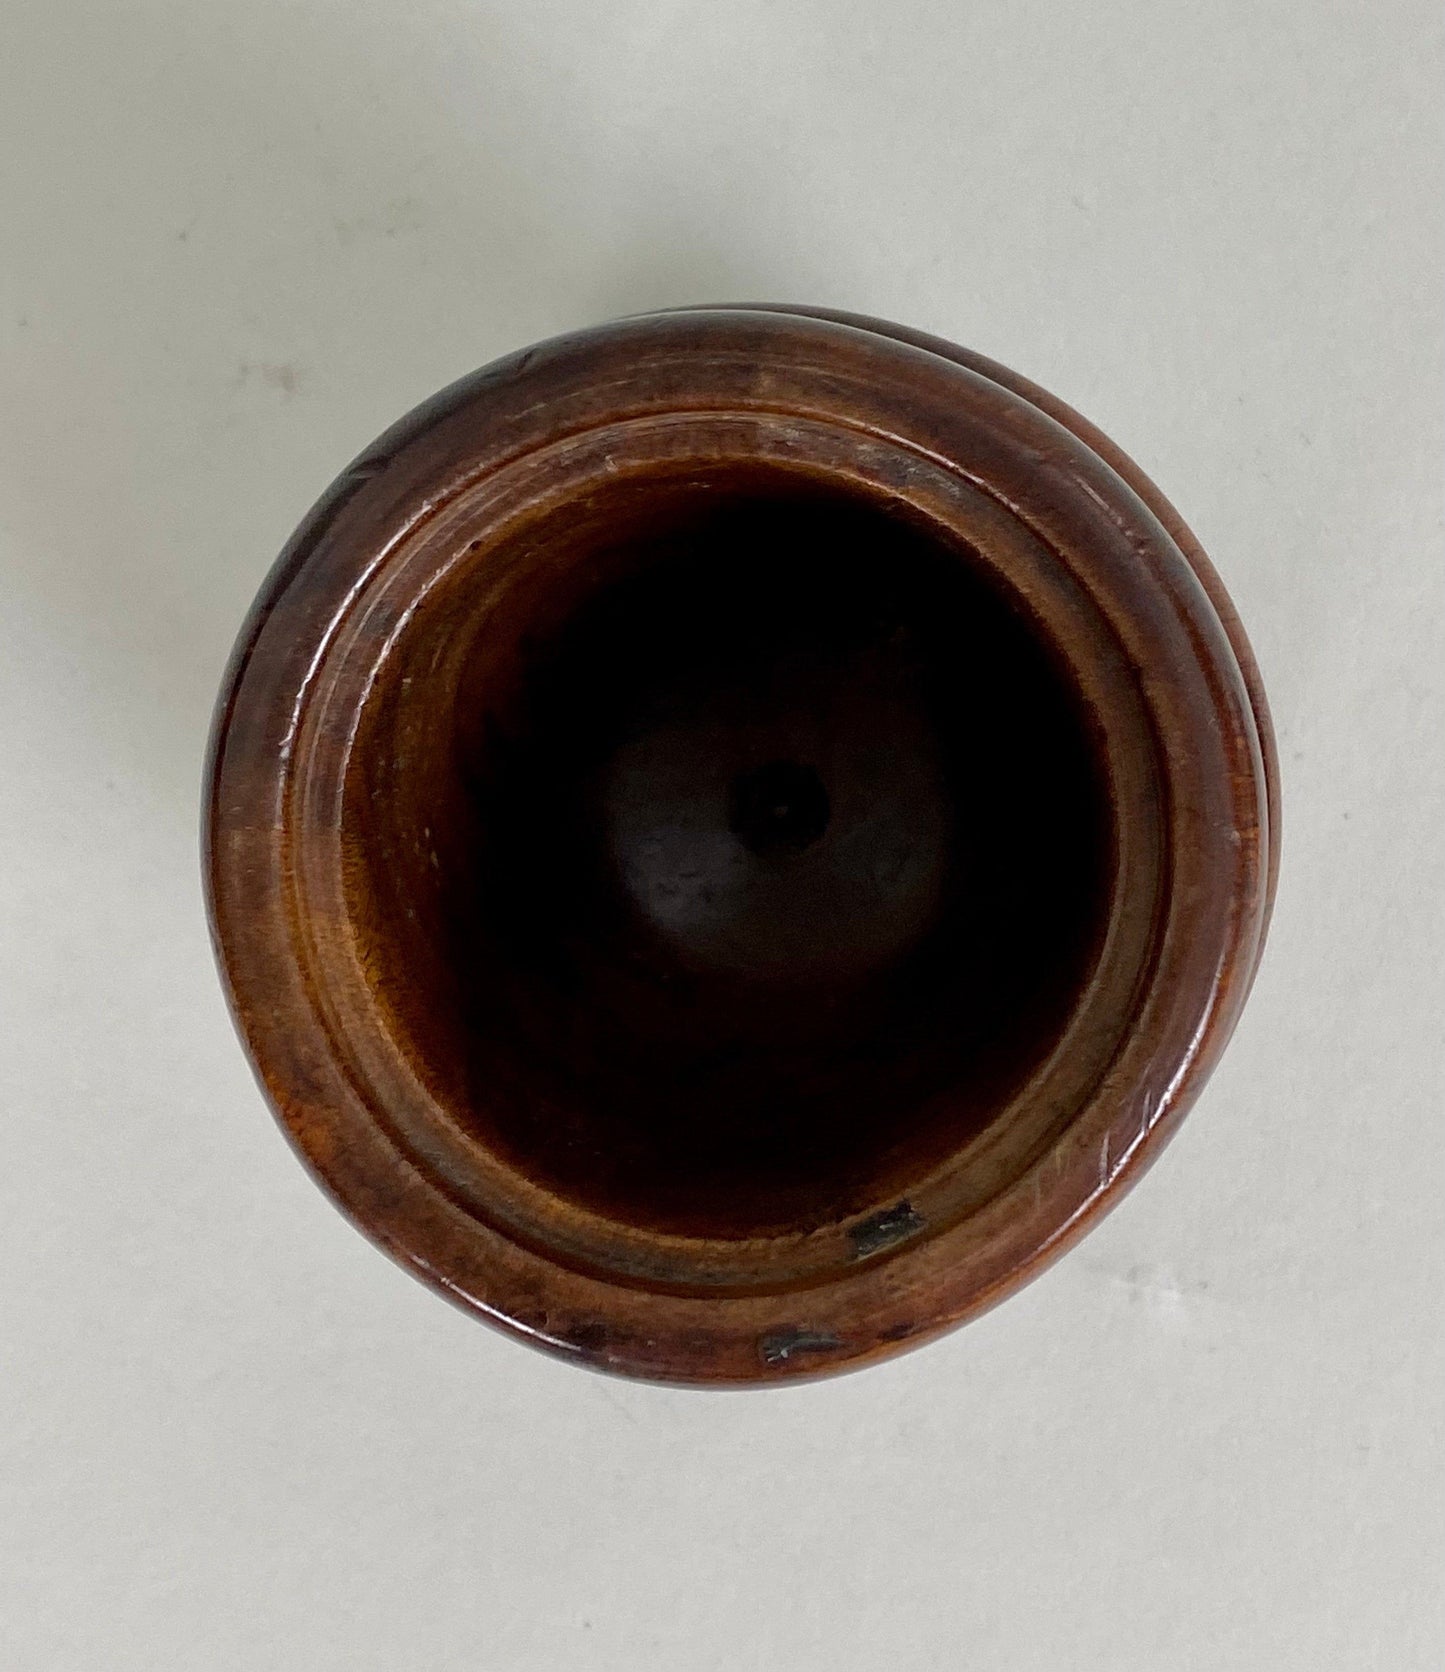 Treen Tobacco Jar and Cover, 20th Century